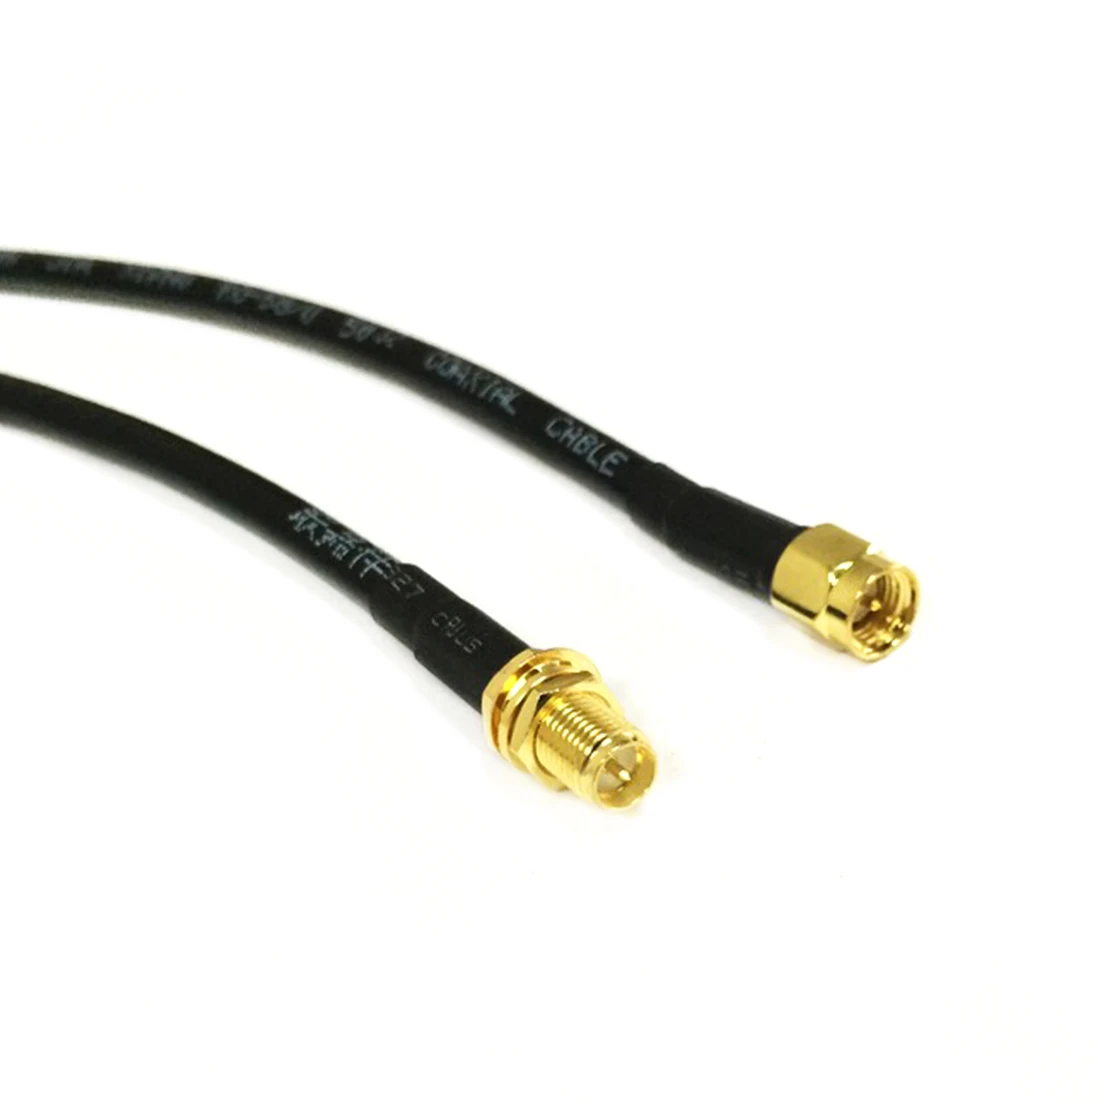 

Modem Coaxial Cable SMA Male Plug Switch RP-SMA Female Jack Connector RG58 Cable Pigtail 50cm 20" Adapter New